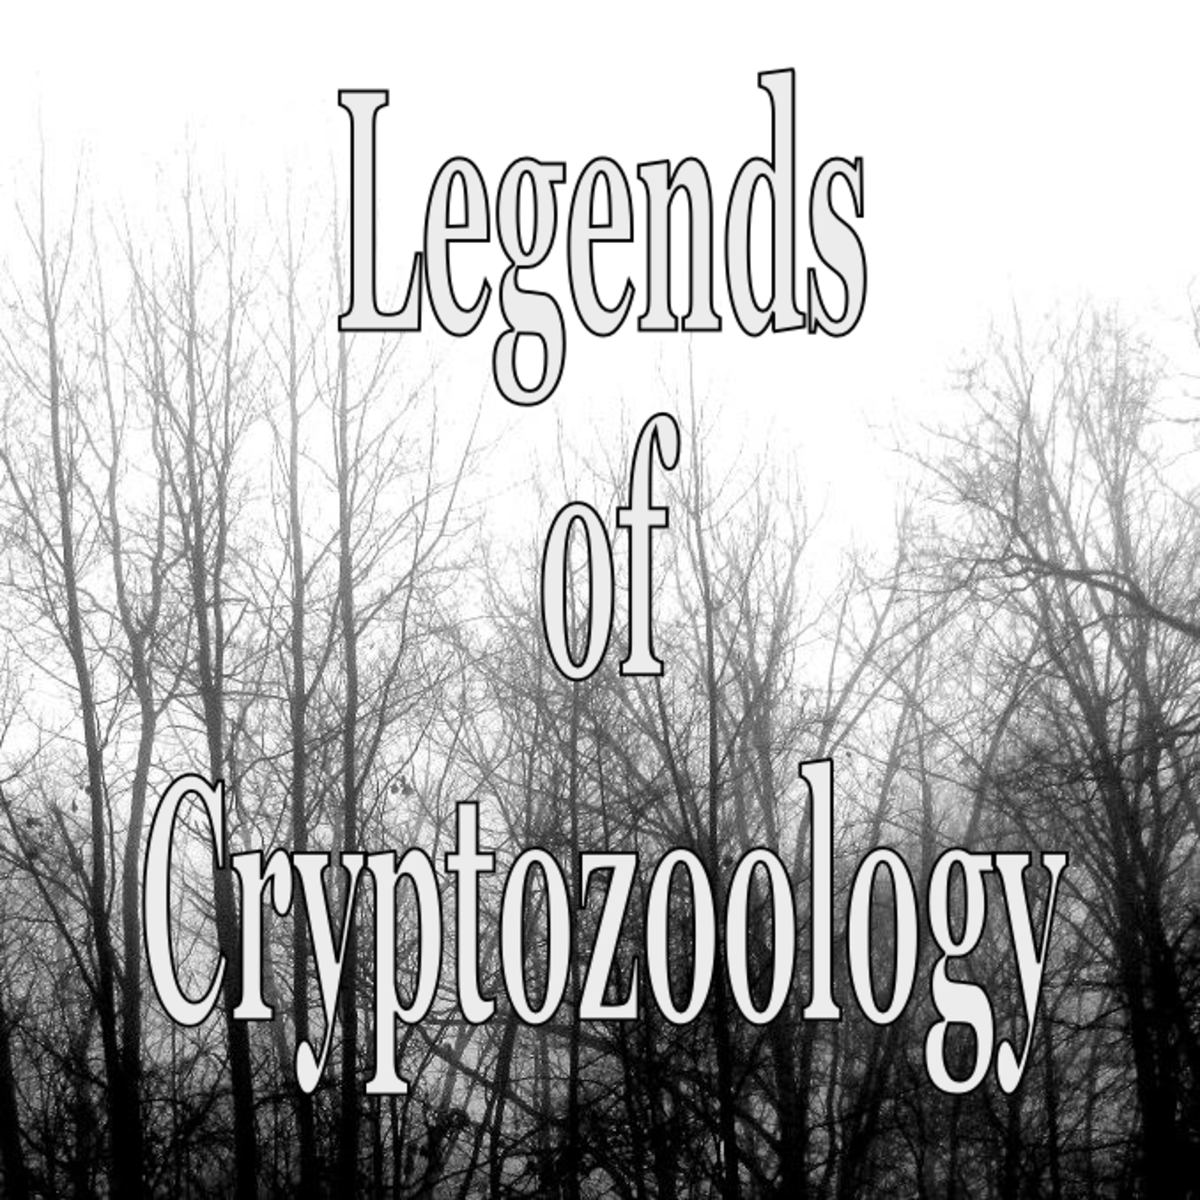 12 Legendary Cryptids and Mythical Monsters of Cryptozoology